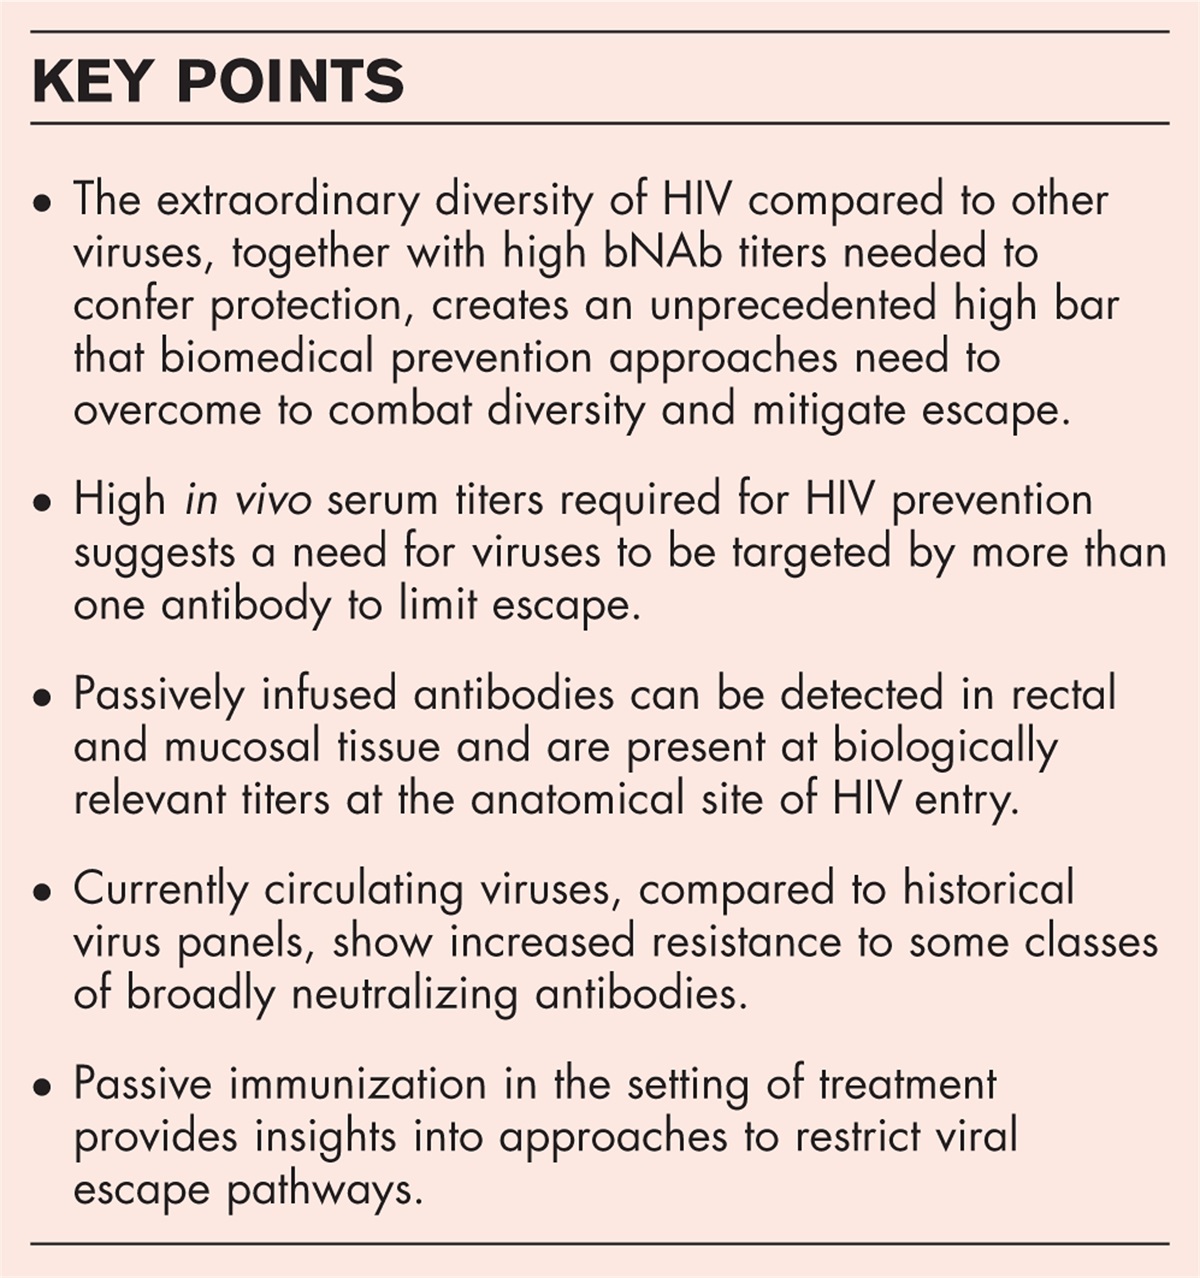 Anticipating HIV viral escape – resistance to active and passive immunization